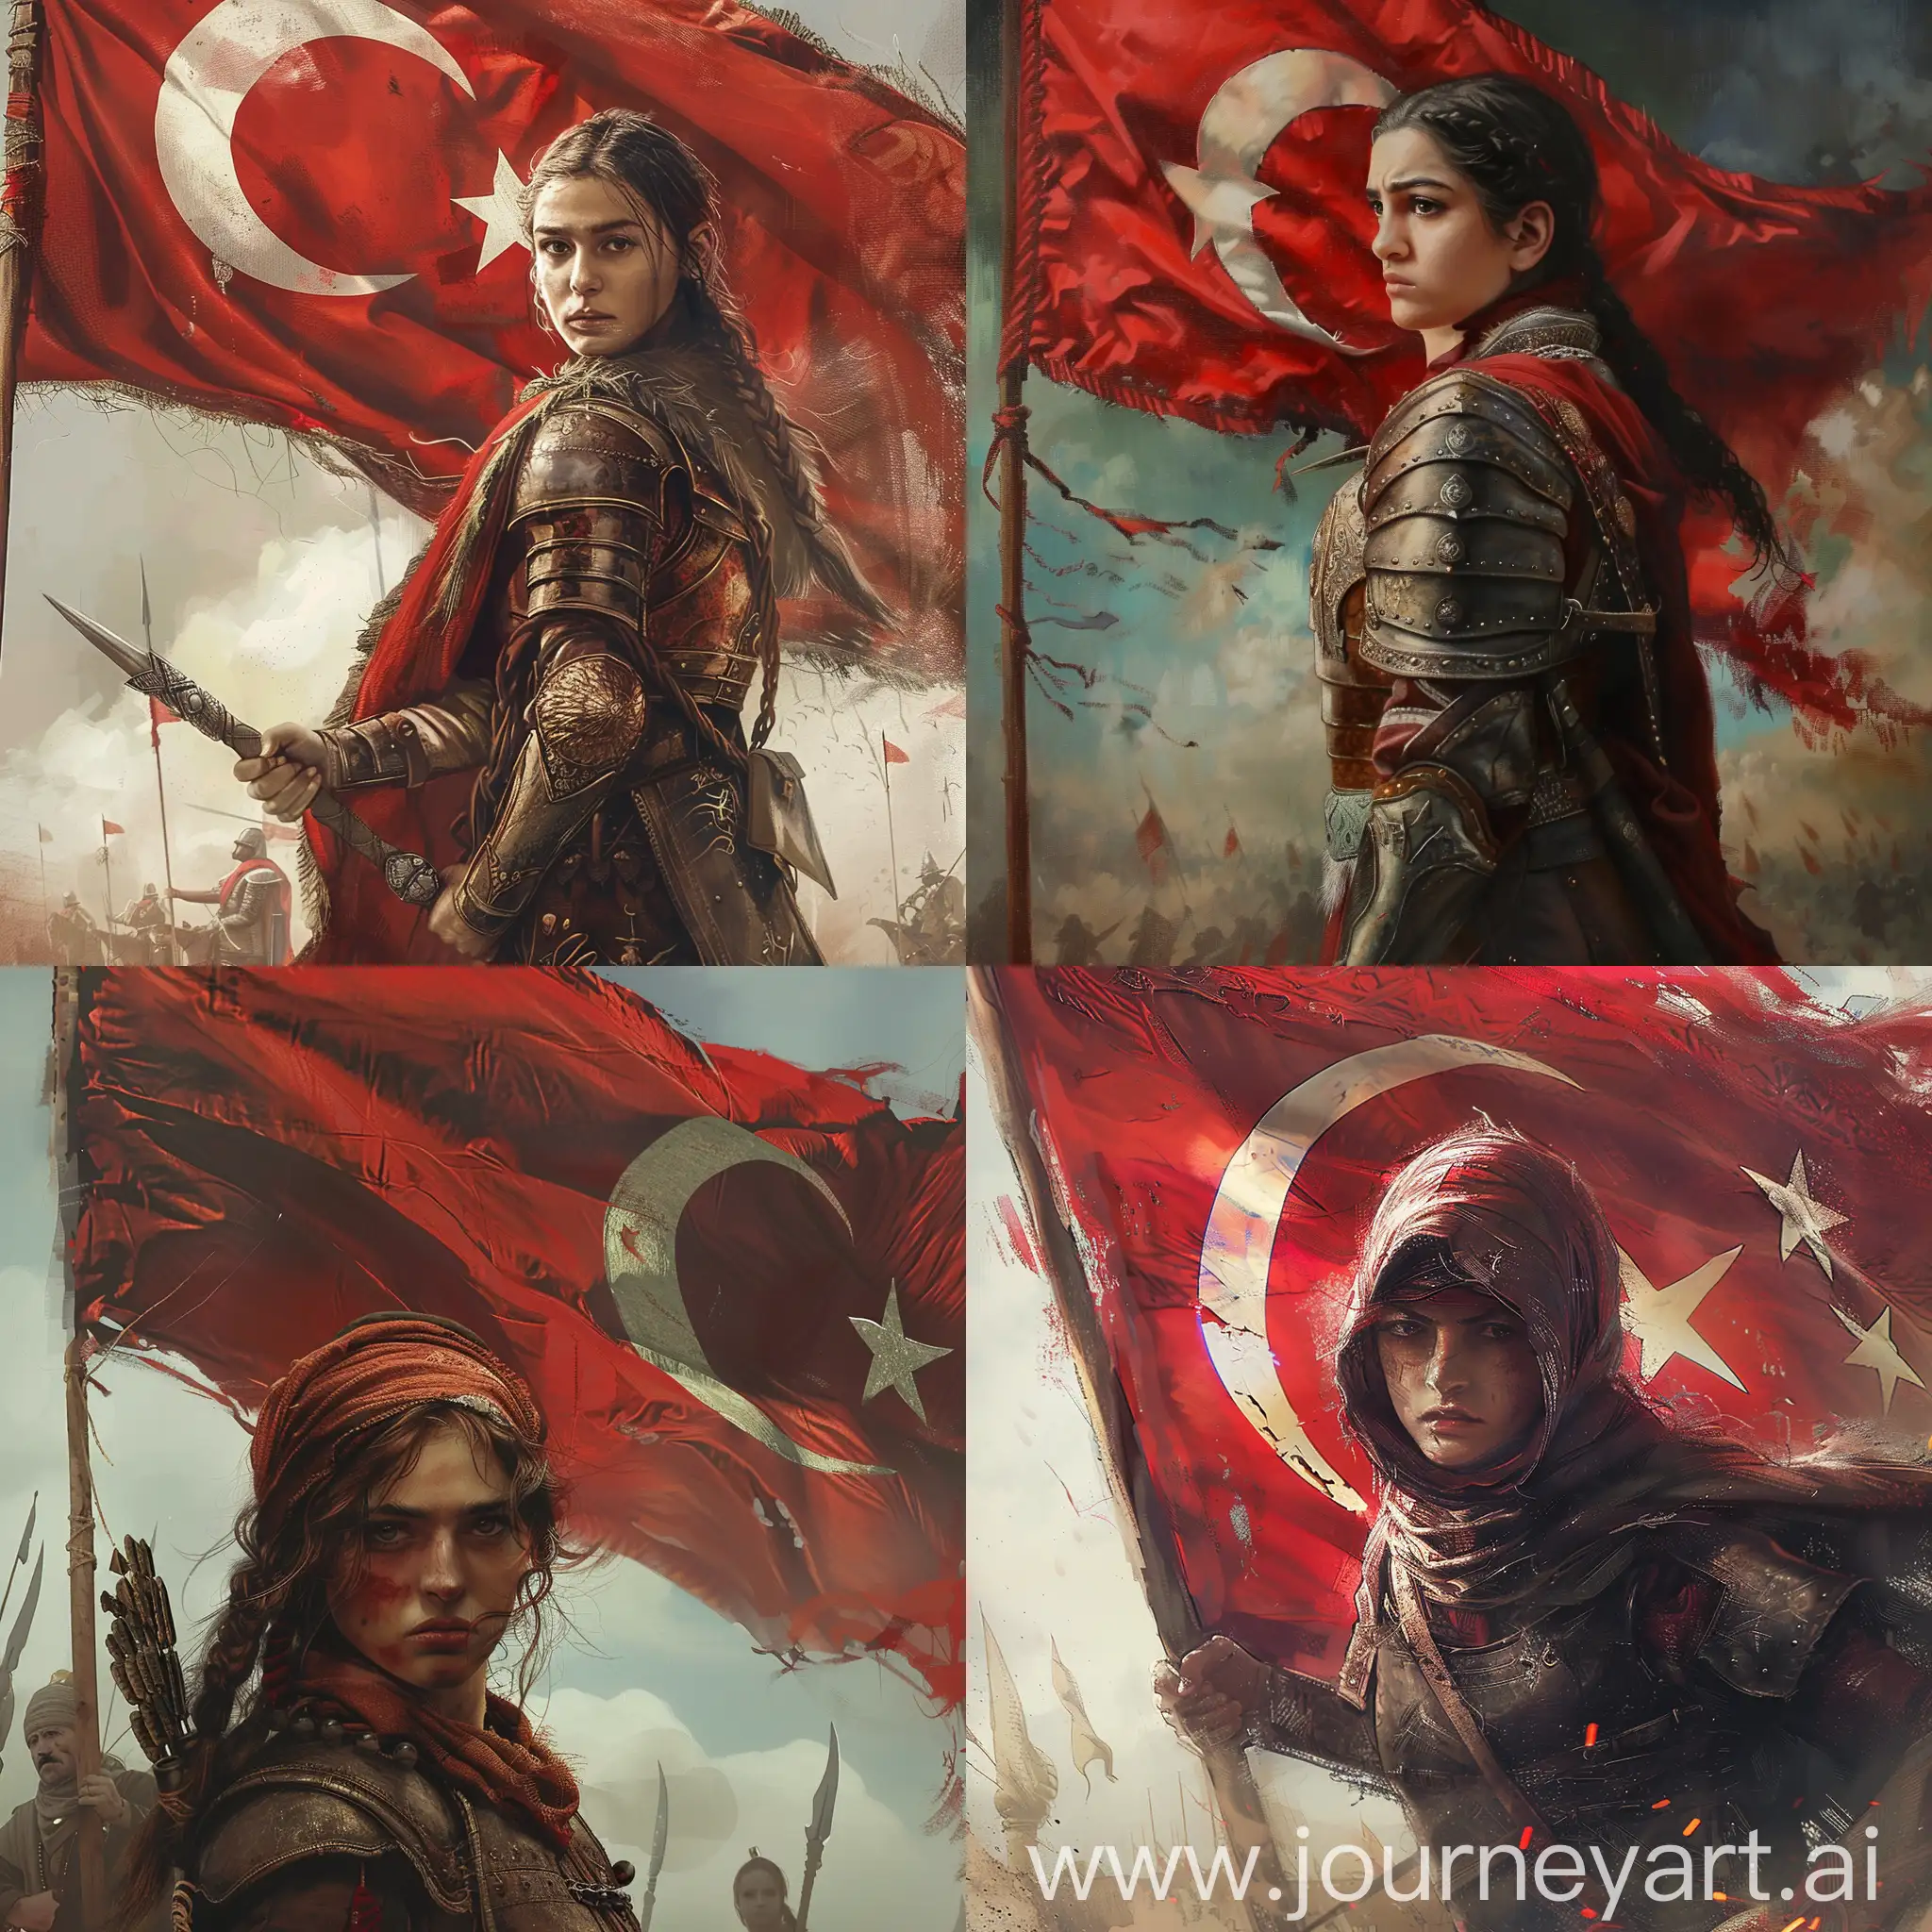 Ottoman-Warrior-Holding-Turkish-Flag-with-Realistic-Girl